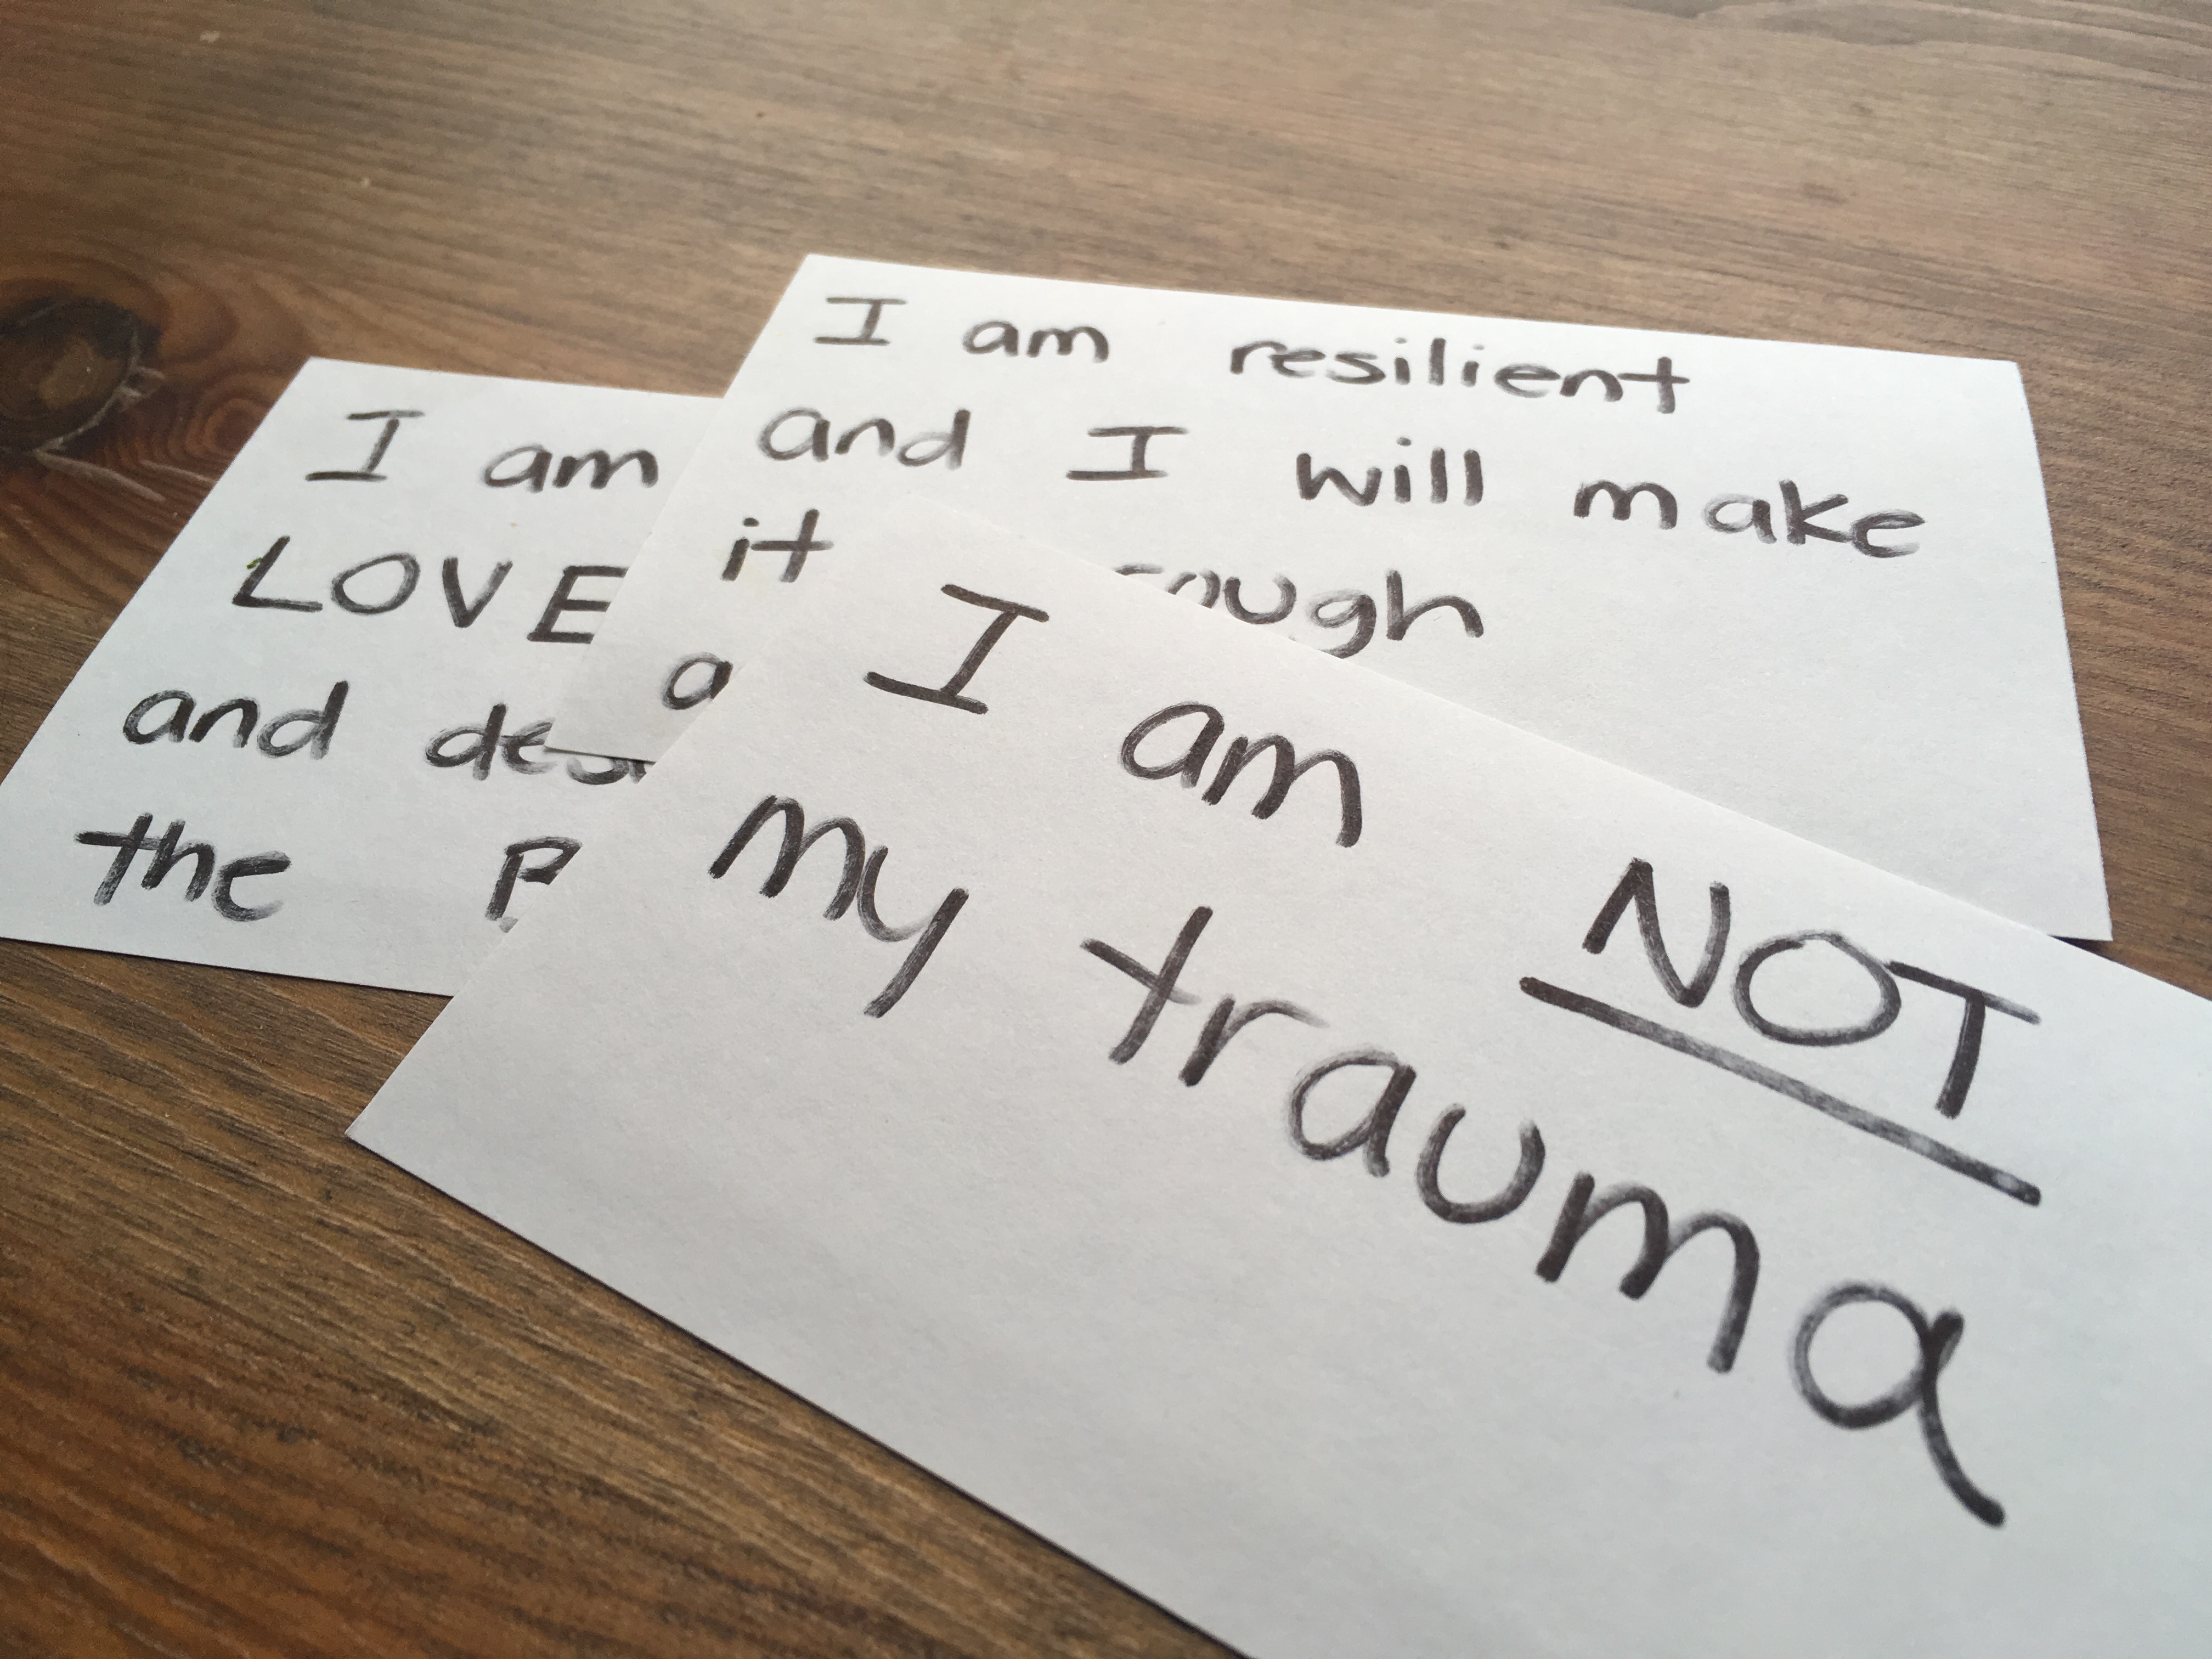 photo of positive affirmations for trauma